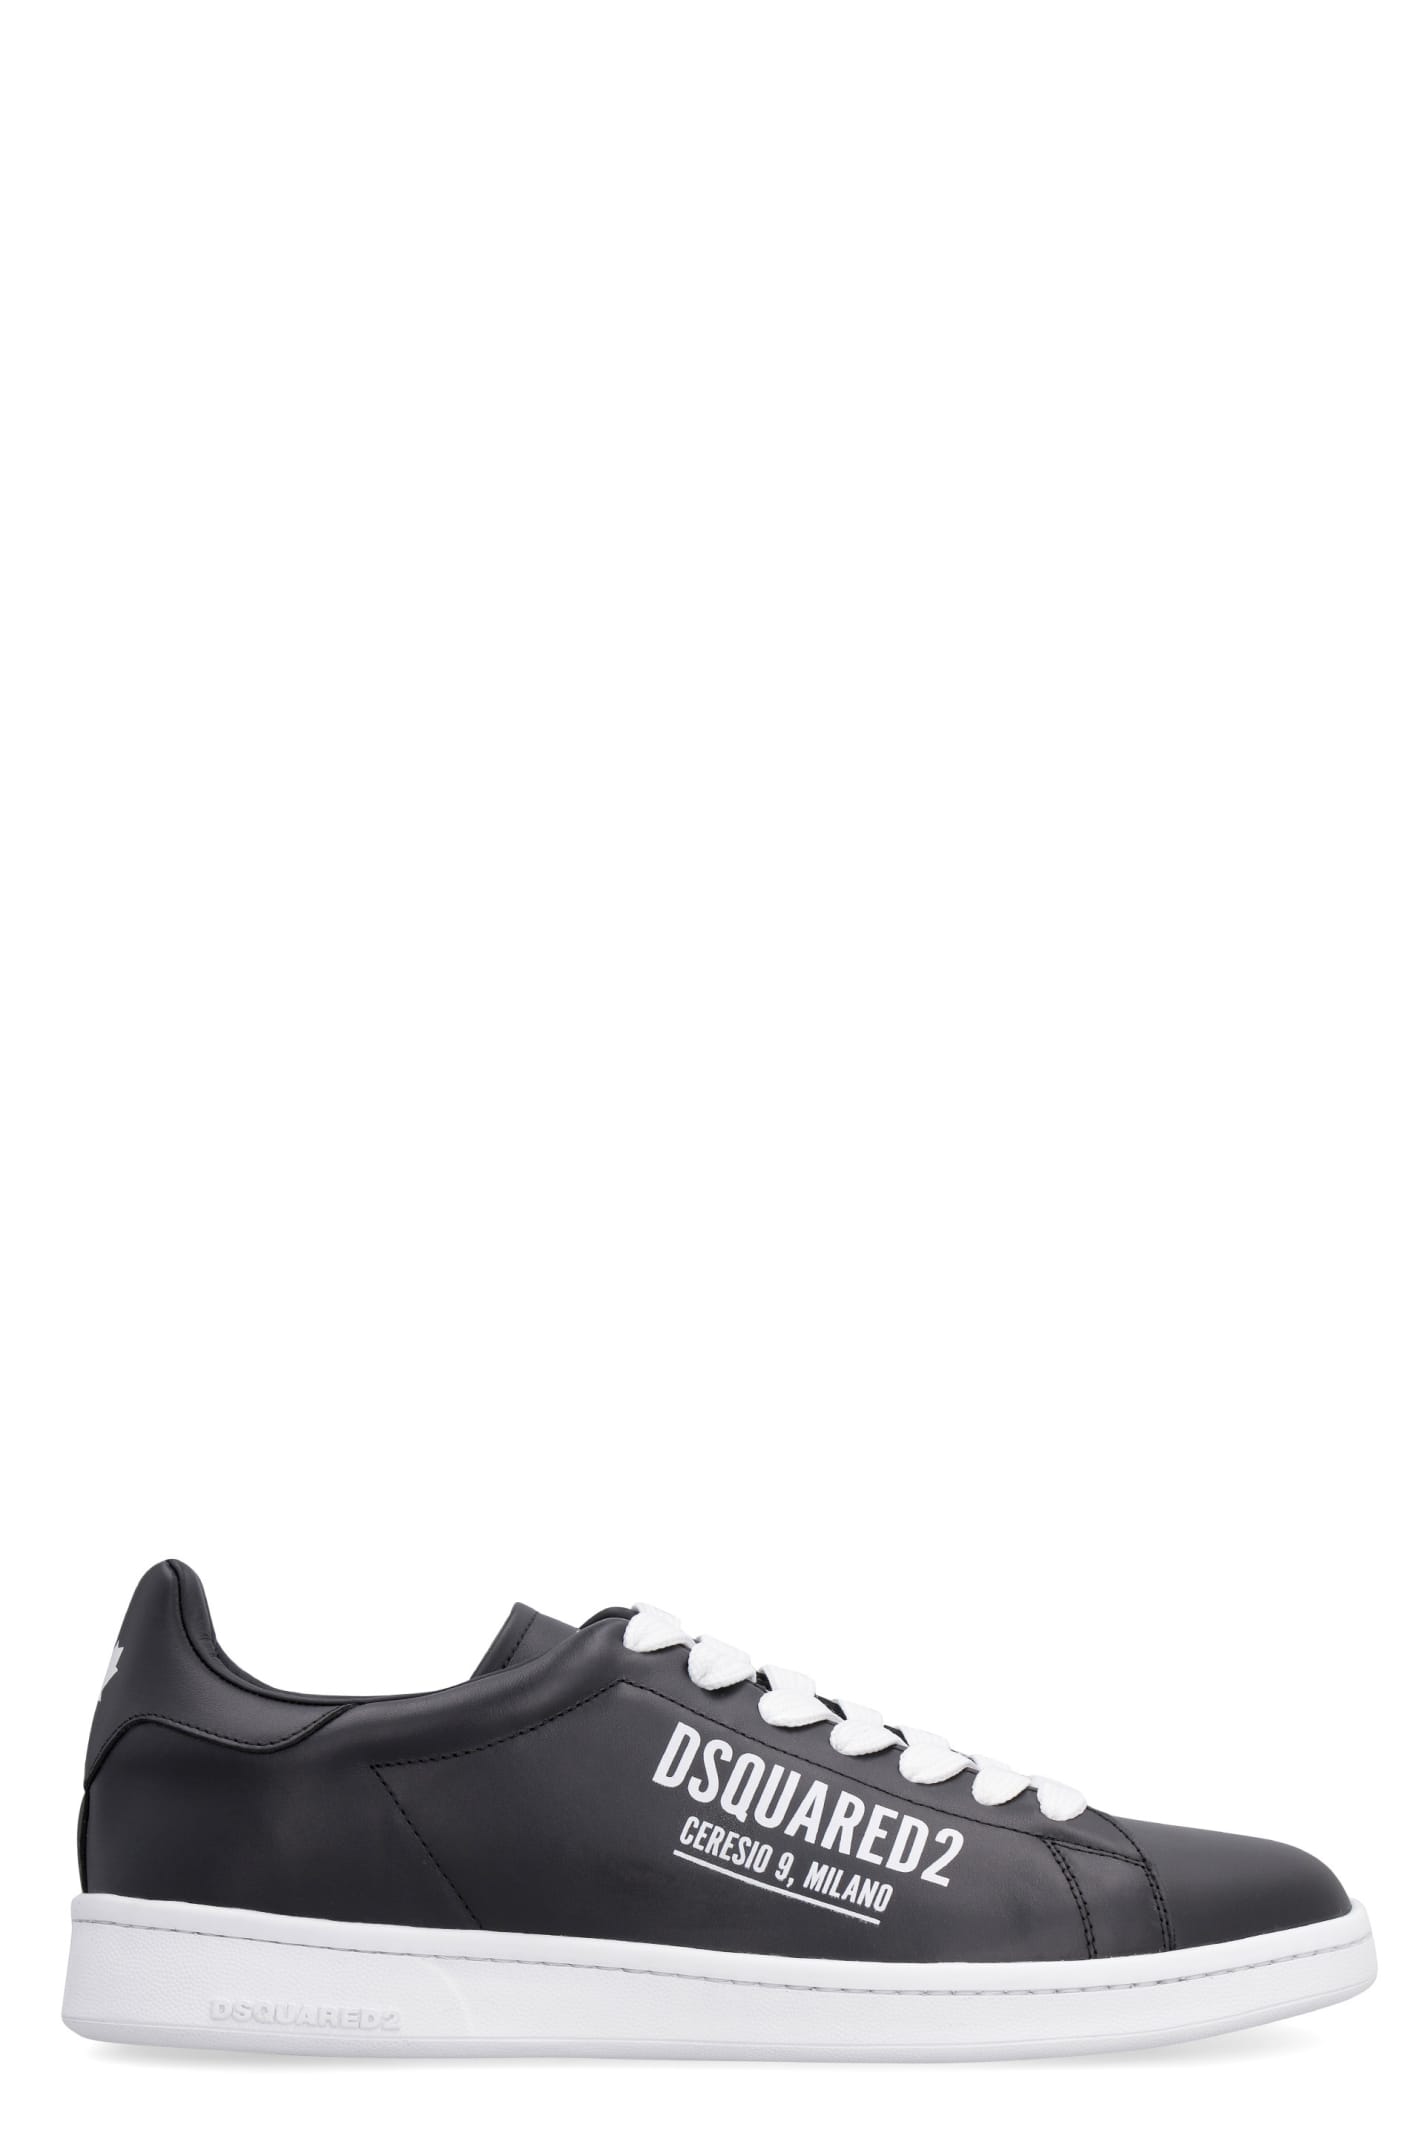 Dsquared2 Boxer Leather Low-top Sneakers